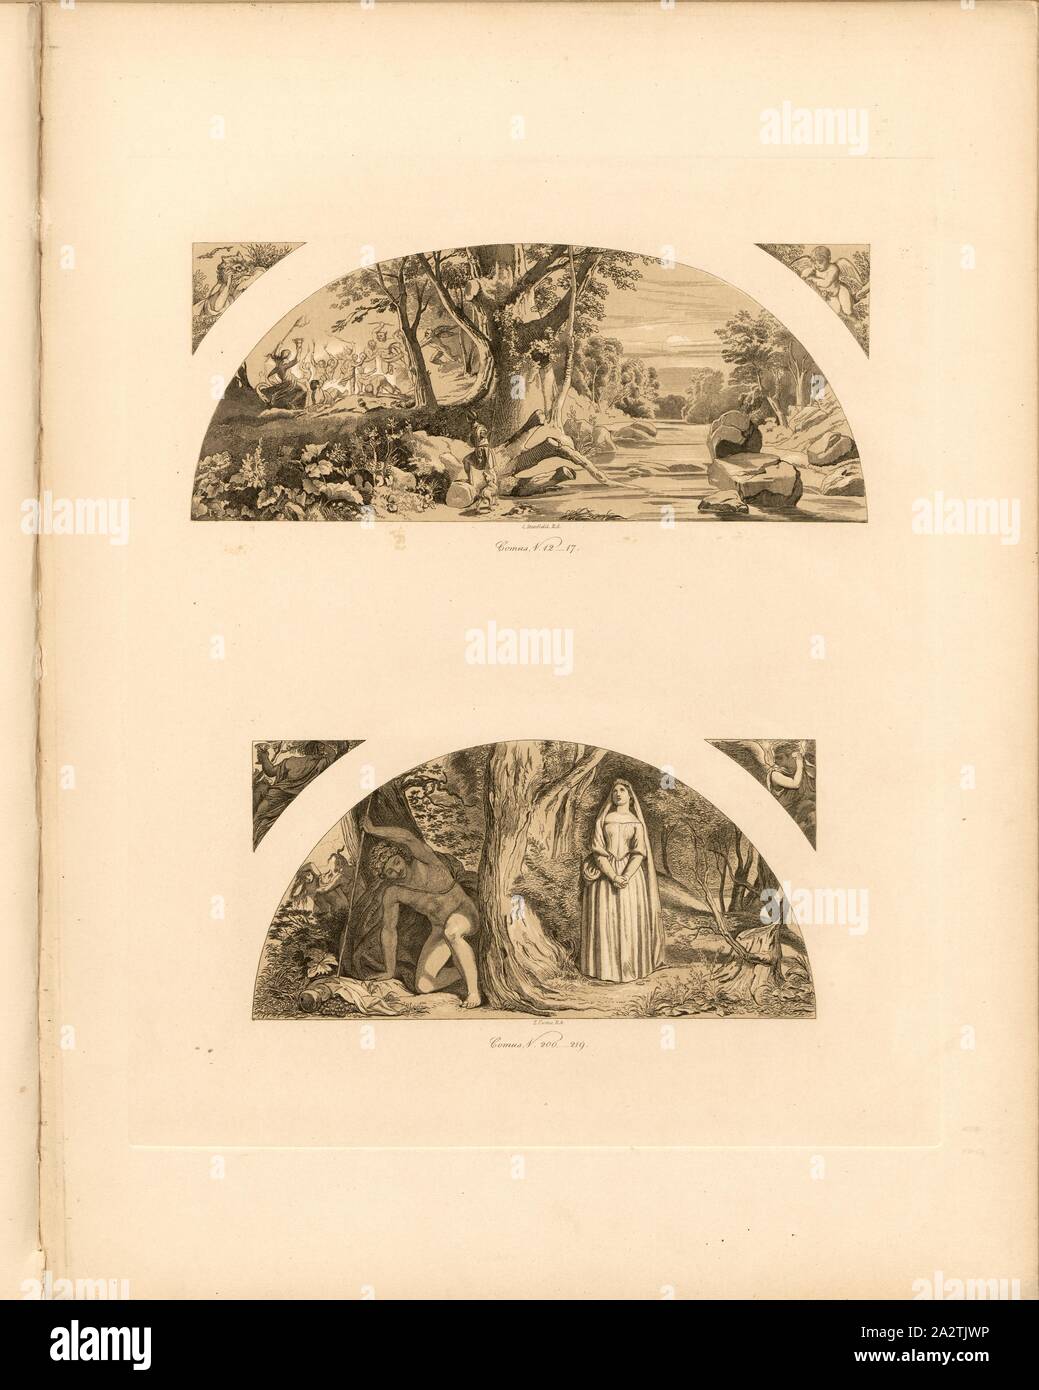 Comus, V. 12-17, Comus, 200-219, Murals with scenes from the poem 'Masque of Comus' by John Milton (Pavilion, Buckingham Palace Gardens), signed: C. Stanfield, RA; T. Uwins, RA, Taf. 11, p. 11, Stanfield, Clarkson; Uwins, Thomas, Ludwig Gruner; Anna Jameson: The decorations of the garden-pavilion in the grounds of Buckingham Palace. London: publ. by John Murray; Longman & Co.; P. & D. Colnaghi; F. G. Moon; and L. Gruner, MDCCCXLVI Stock Photo